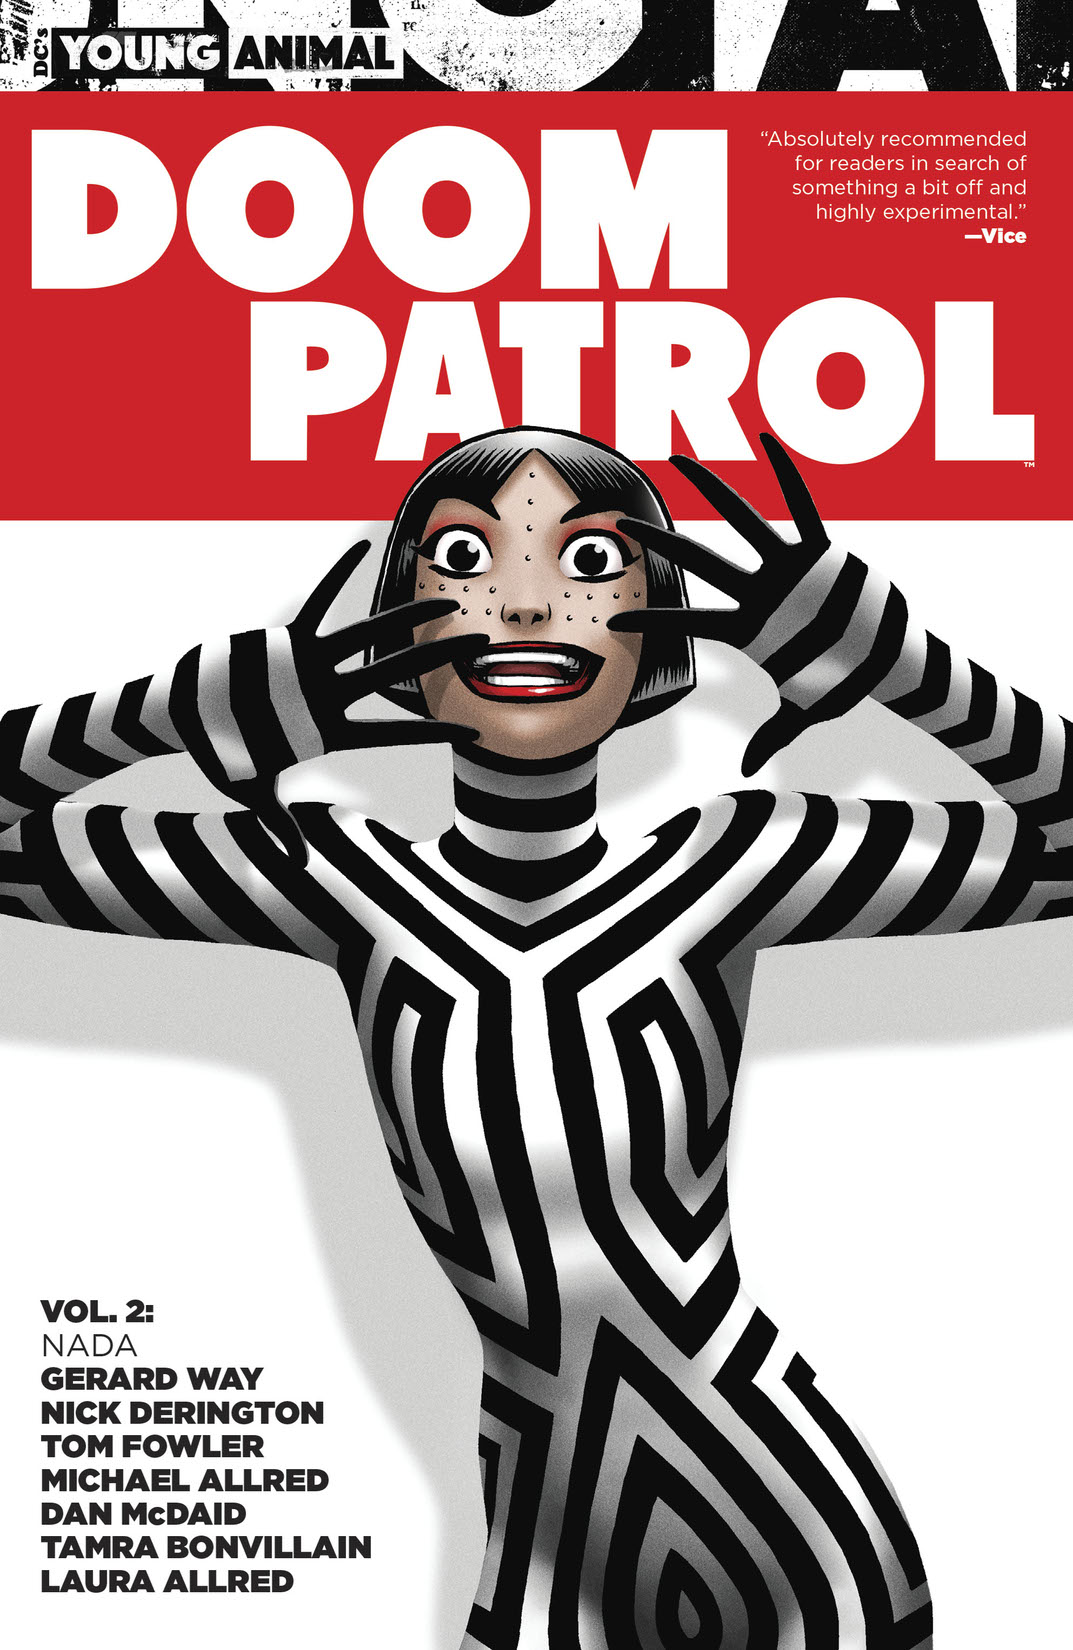 Doom Patrol Vol. 2: Nada (Young Animal) preview images